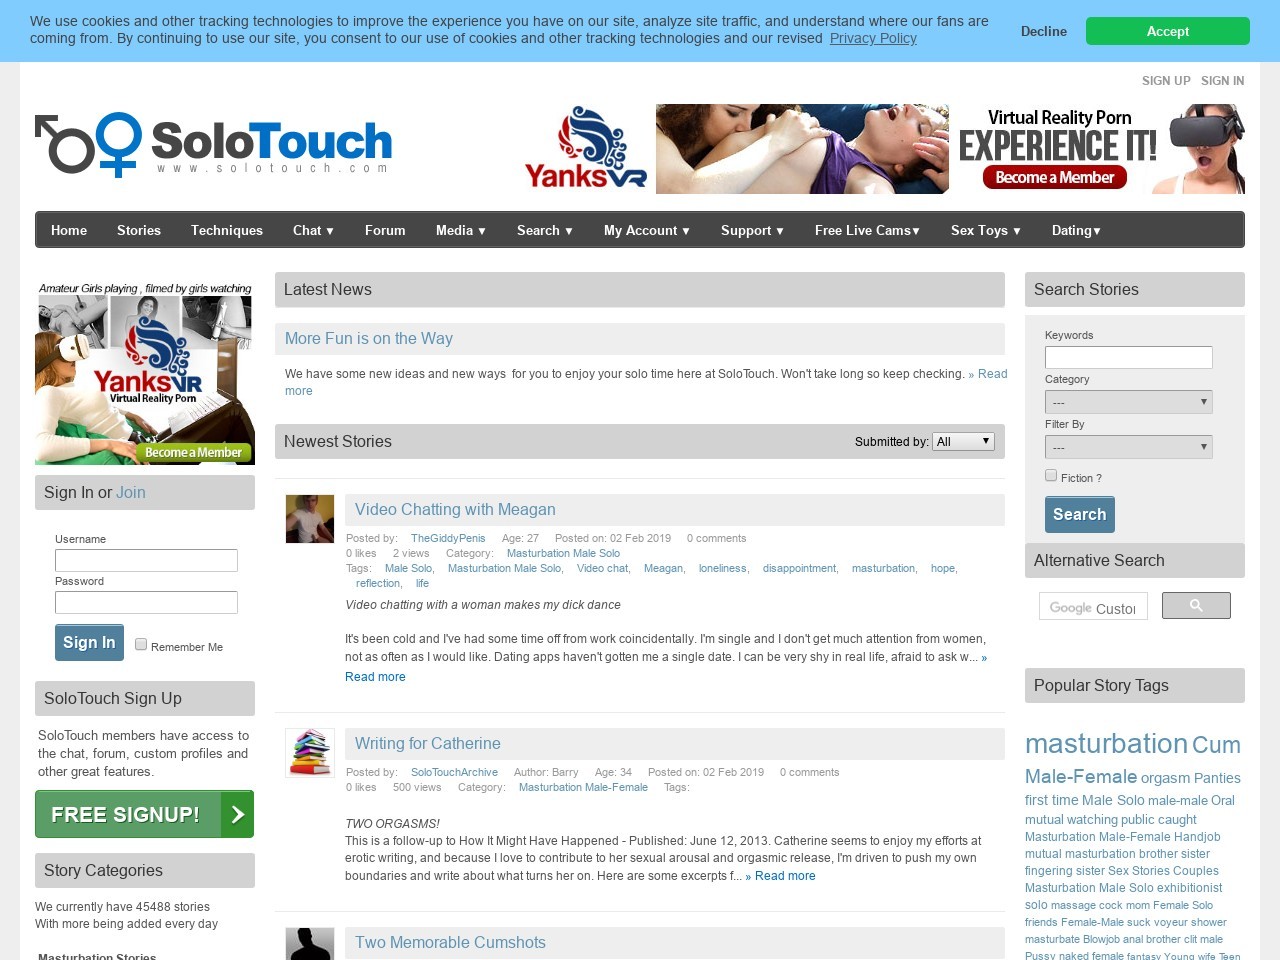 SoloTouch picture pic